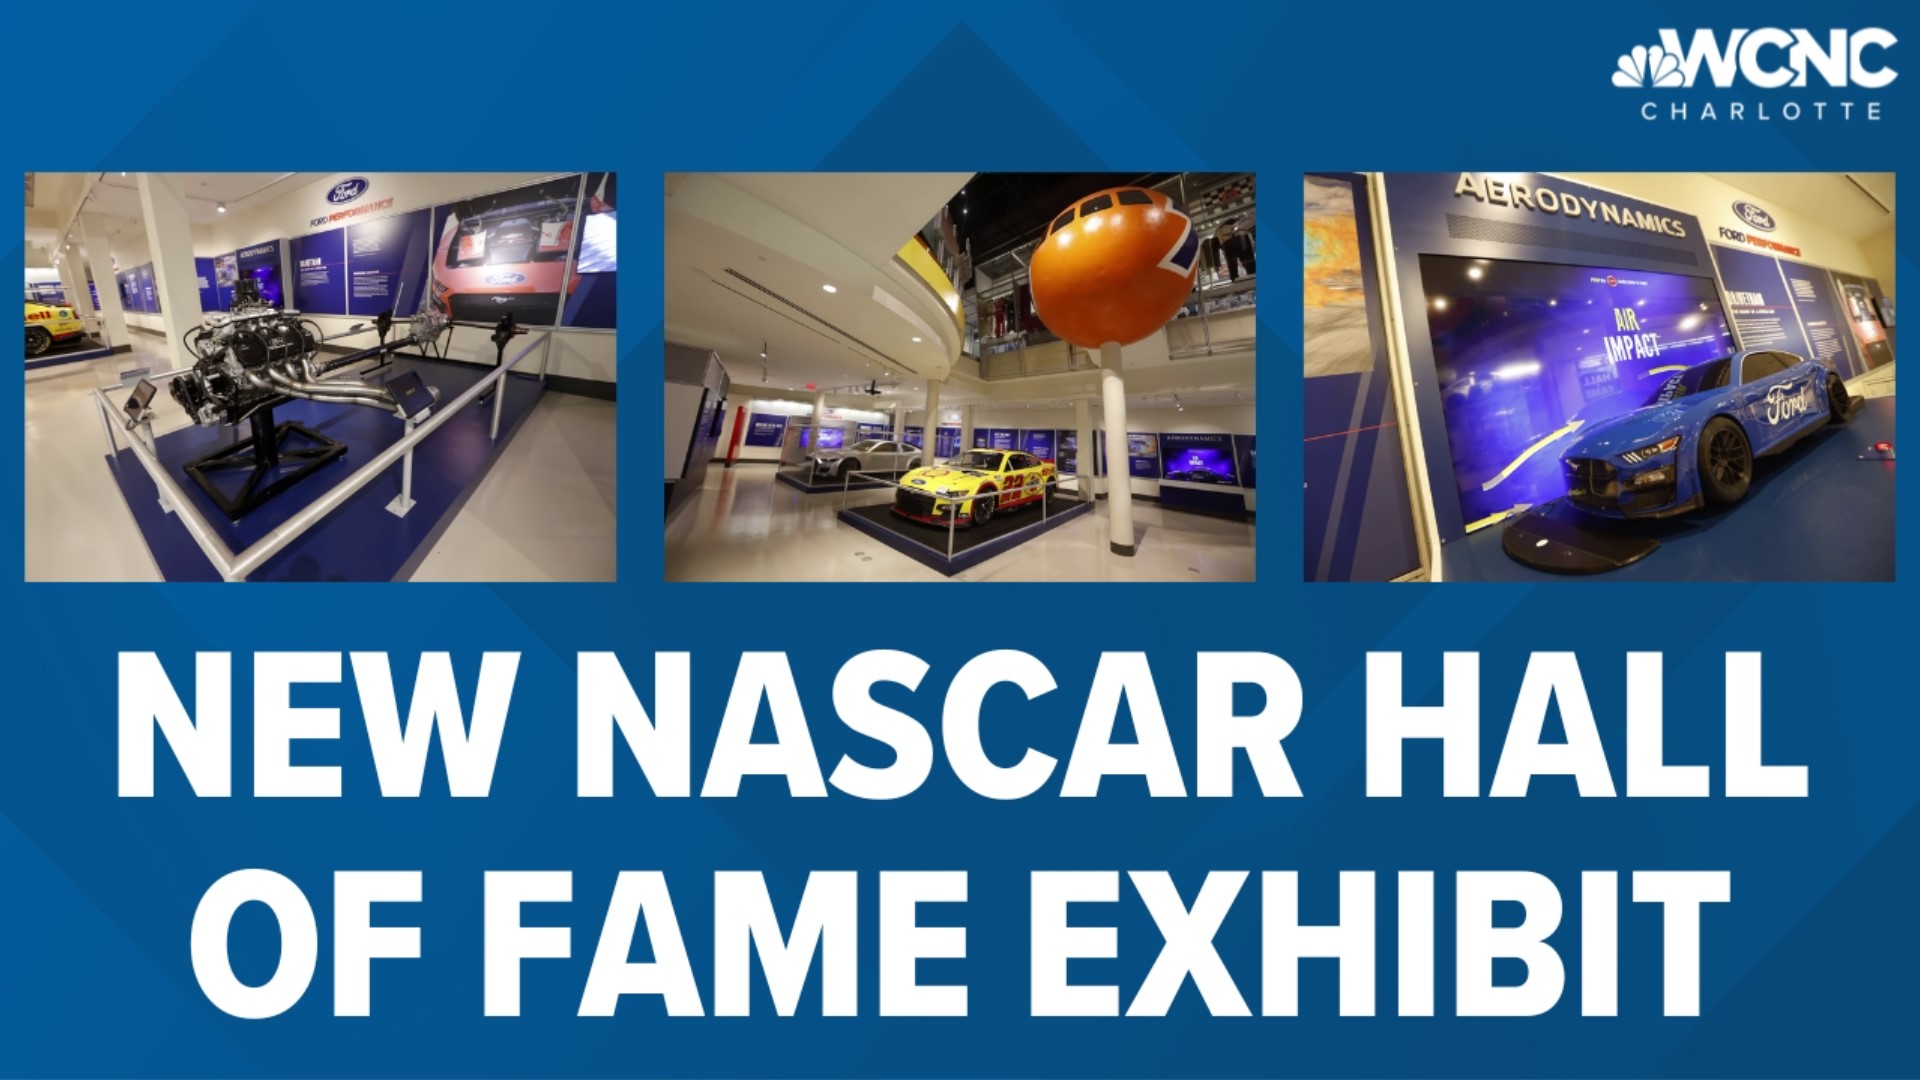 NASCAR organizers make an addition to their "Inside NASCAR" gallery featuring a special showing from Ford.